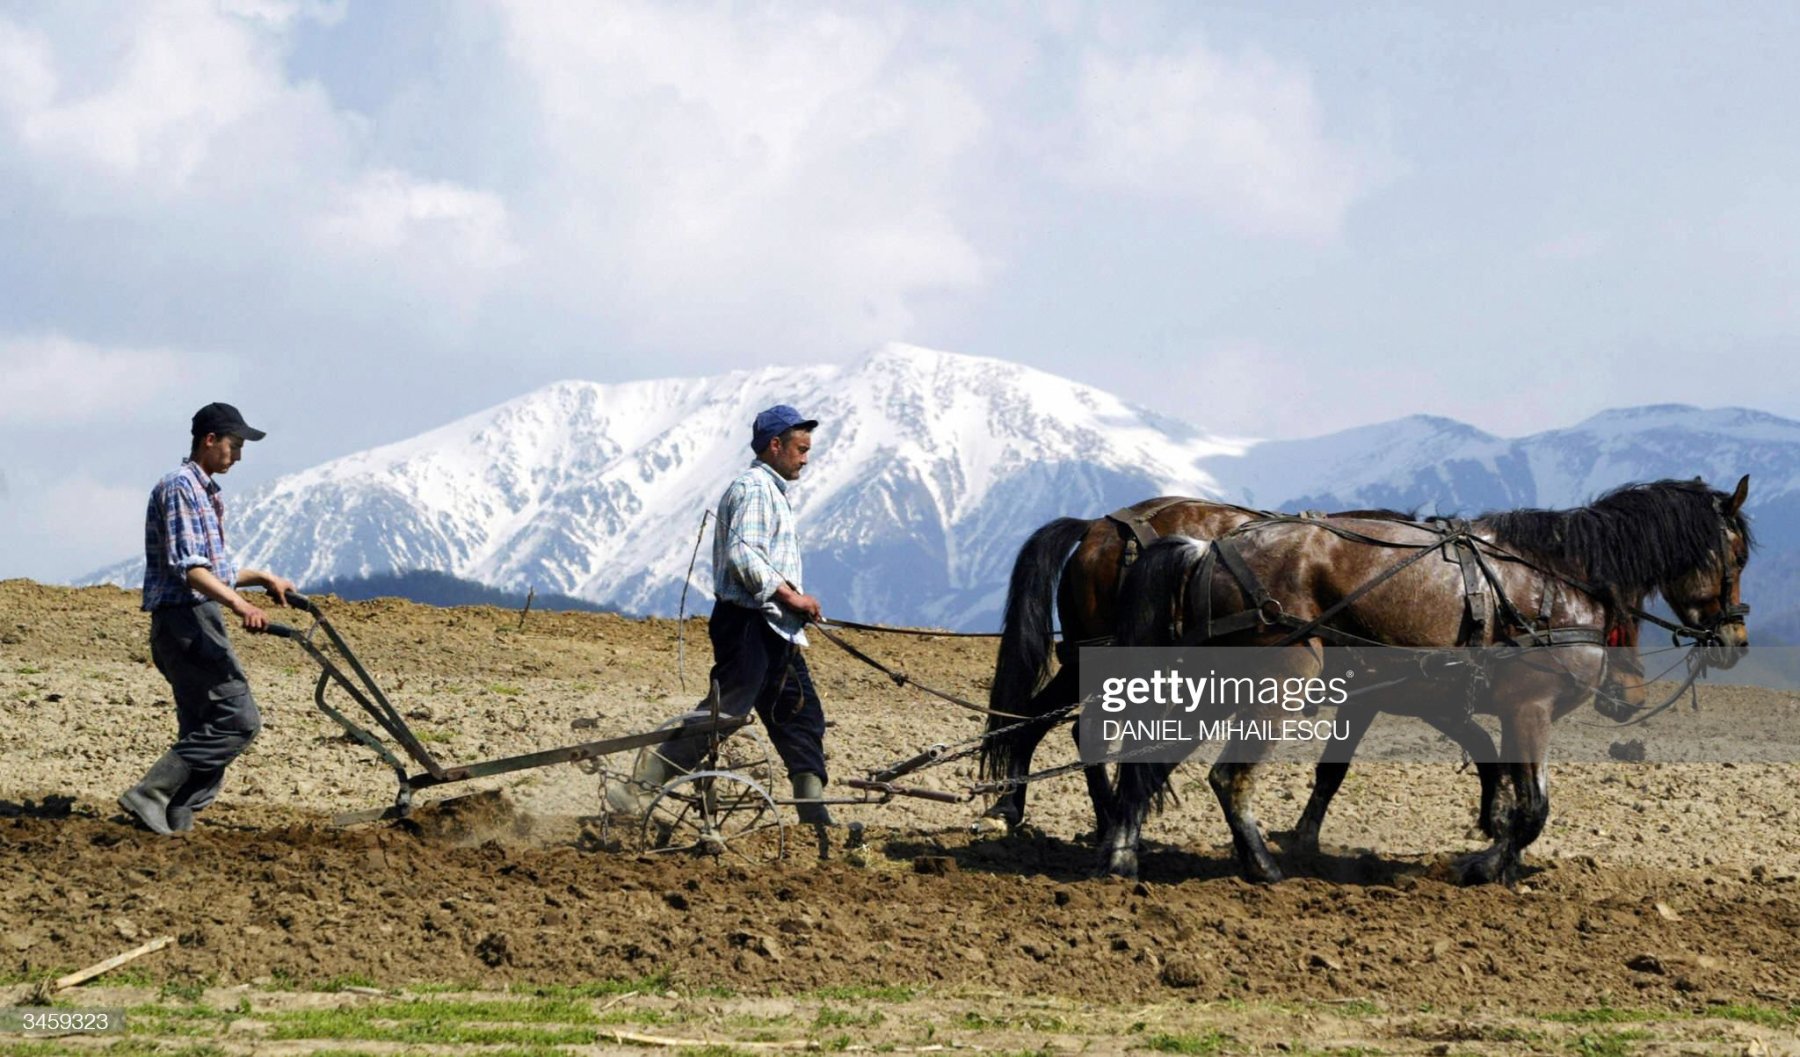 SIBIU, ROMANIA:  Romanian peasant uses an old plough pulled by horses, near Sibiu city (350 km from Bucharest), 23 April 2003. Romania hopes to finish all the negotiations chapters with EU this year, including agriculture, tough some 40 percent of Romanian population that live in countryside areas and depends on primitive subsistence agriculture.. AFP PHOTO DANIEL MIHAILESCU  (Photo credit should read DANIEL MIHAILESCU/AFP via Getty Images)